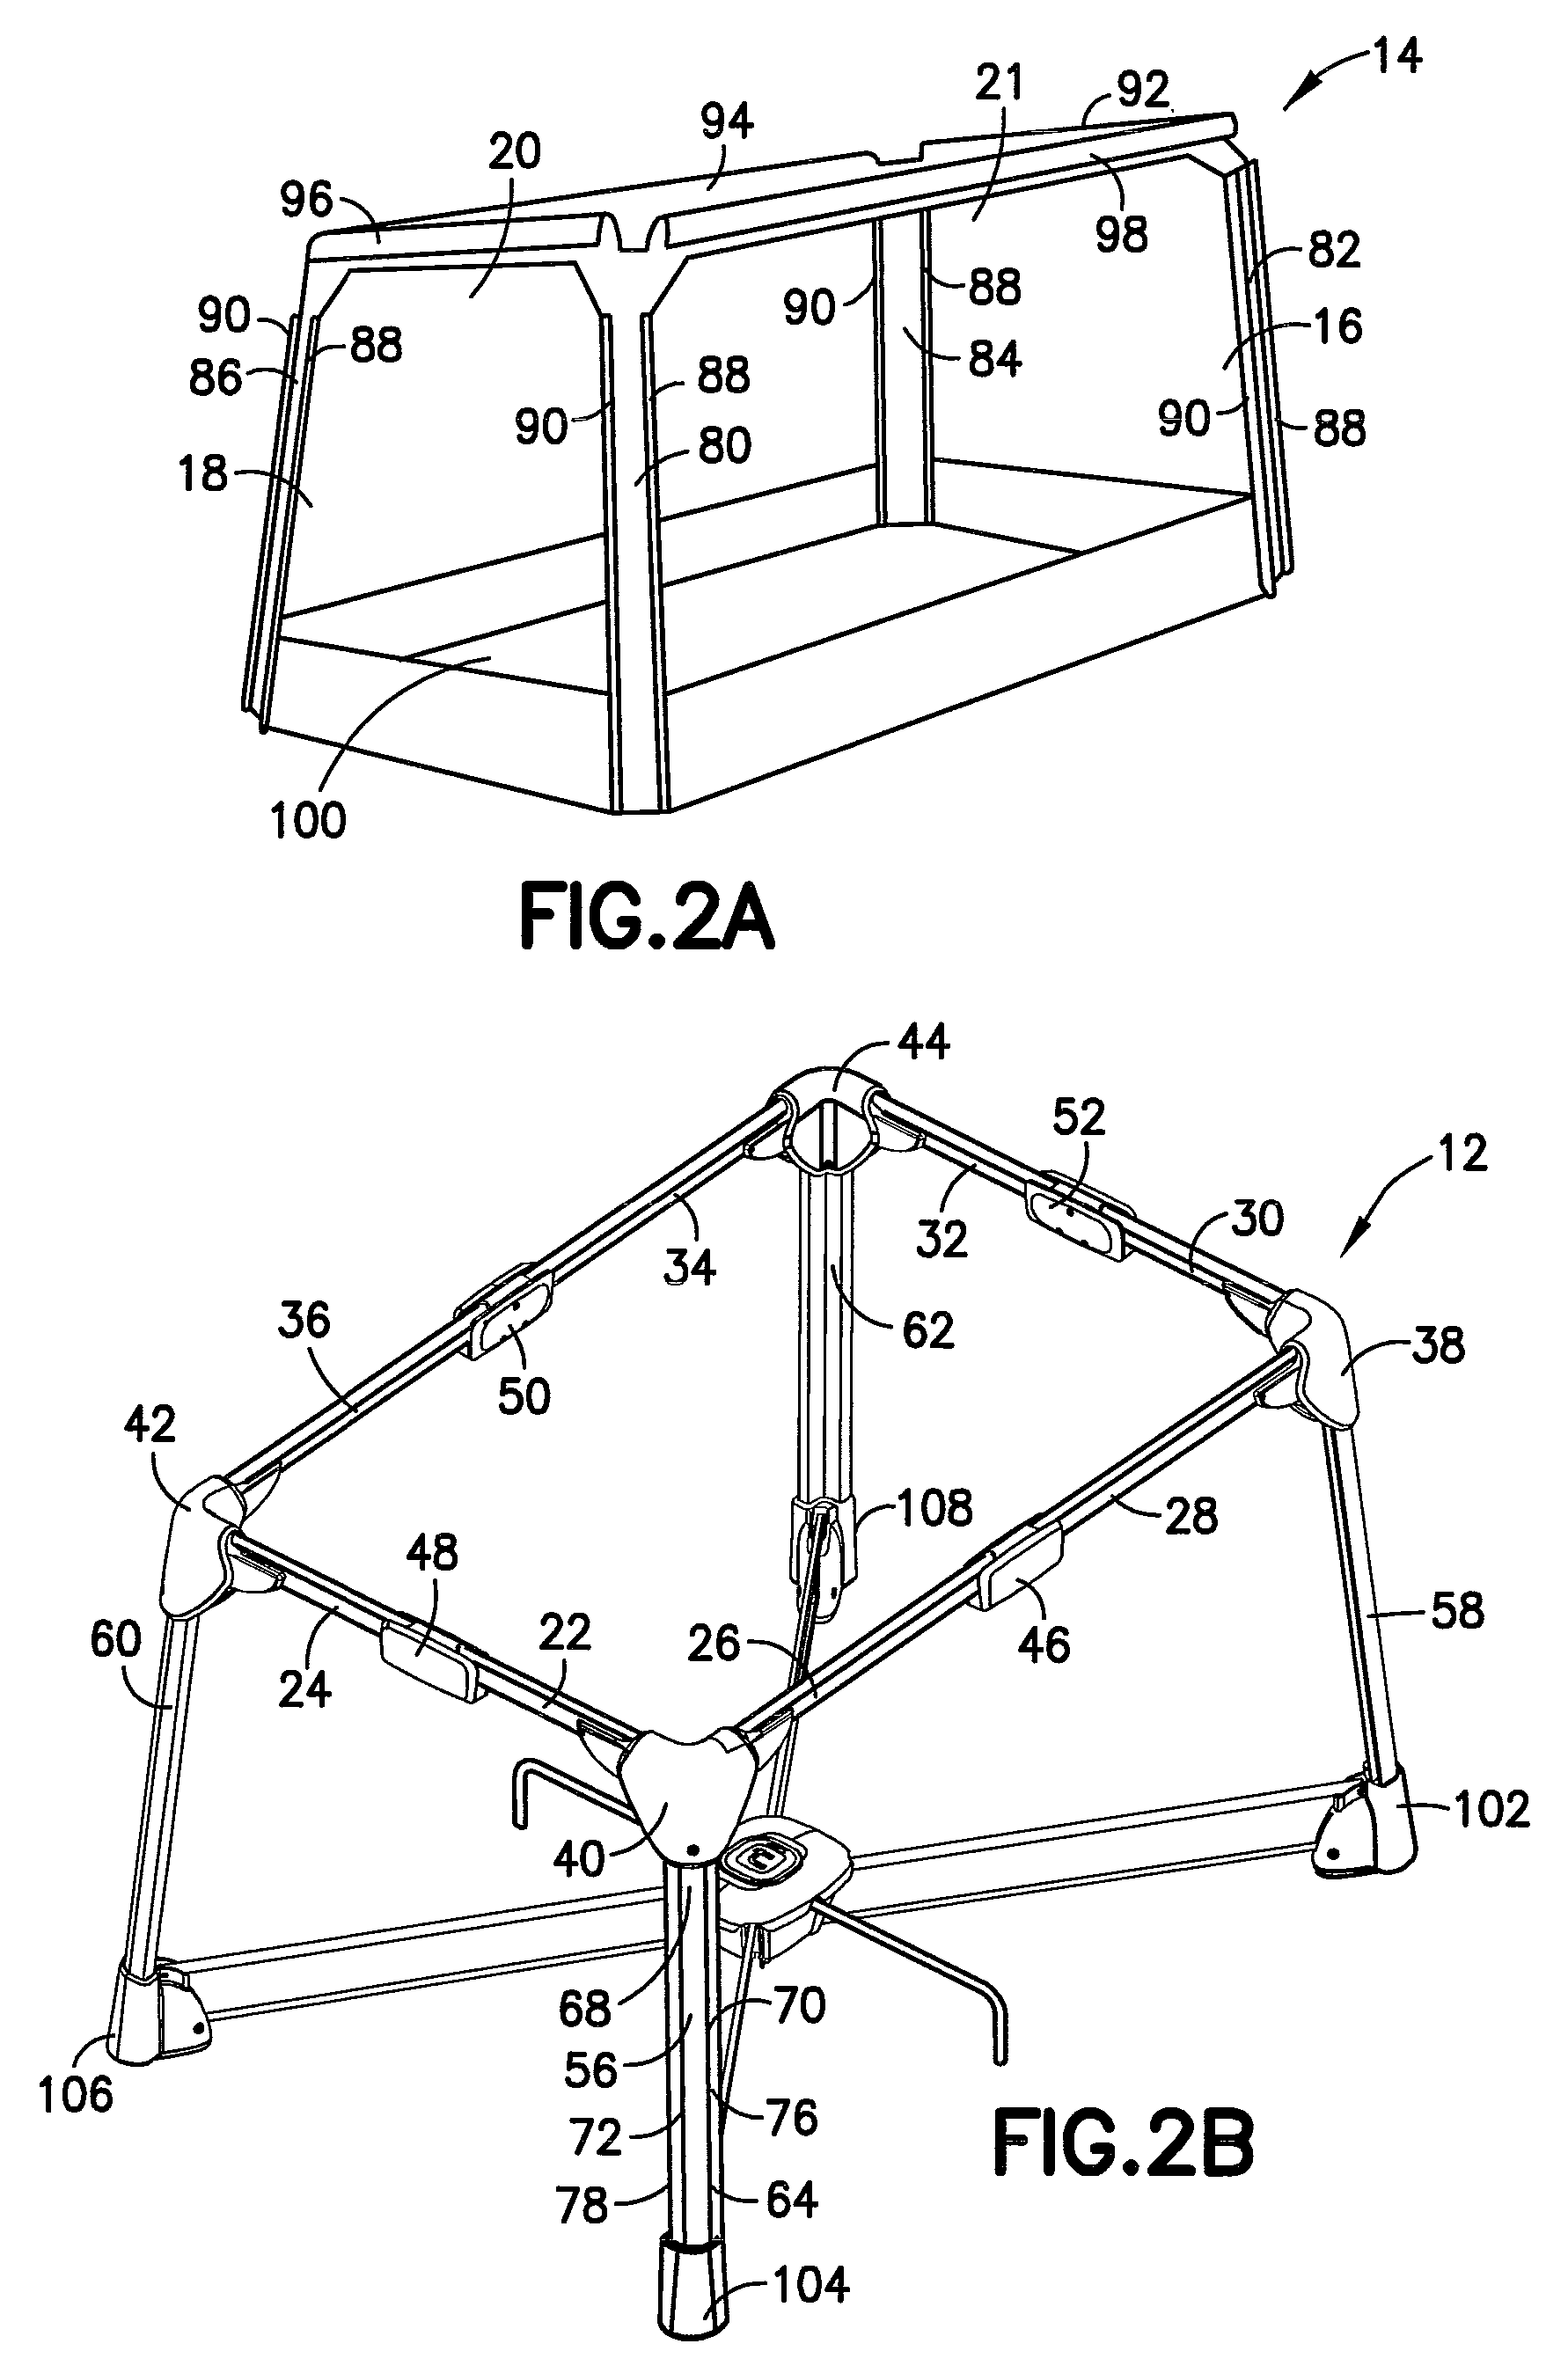 Foldable play yard apparatus including a clamp and a method of attaching a flexible sheet to the clamp